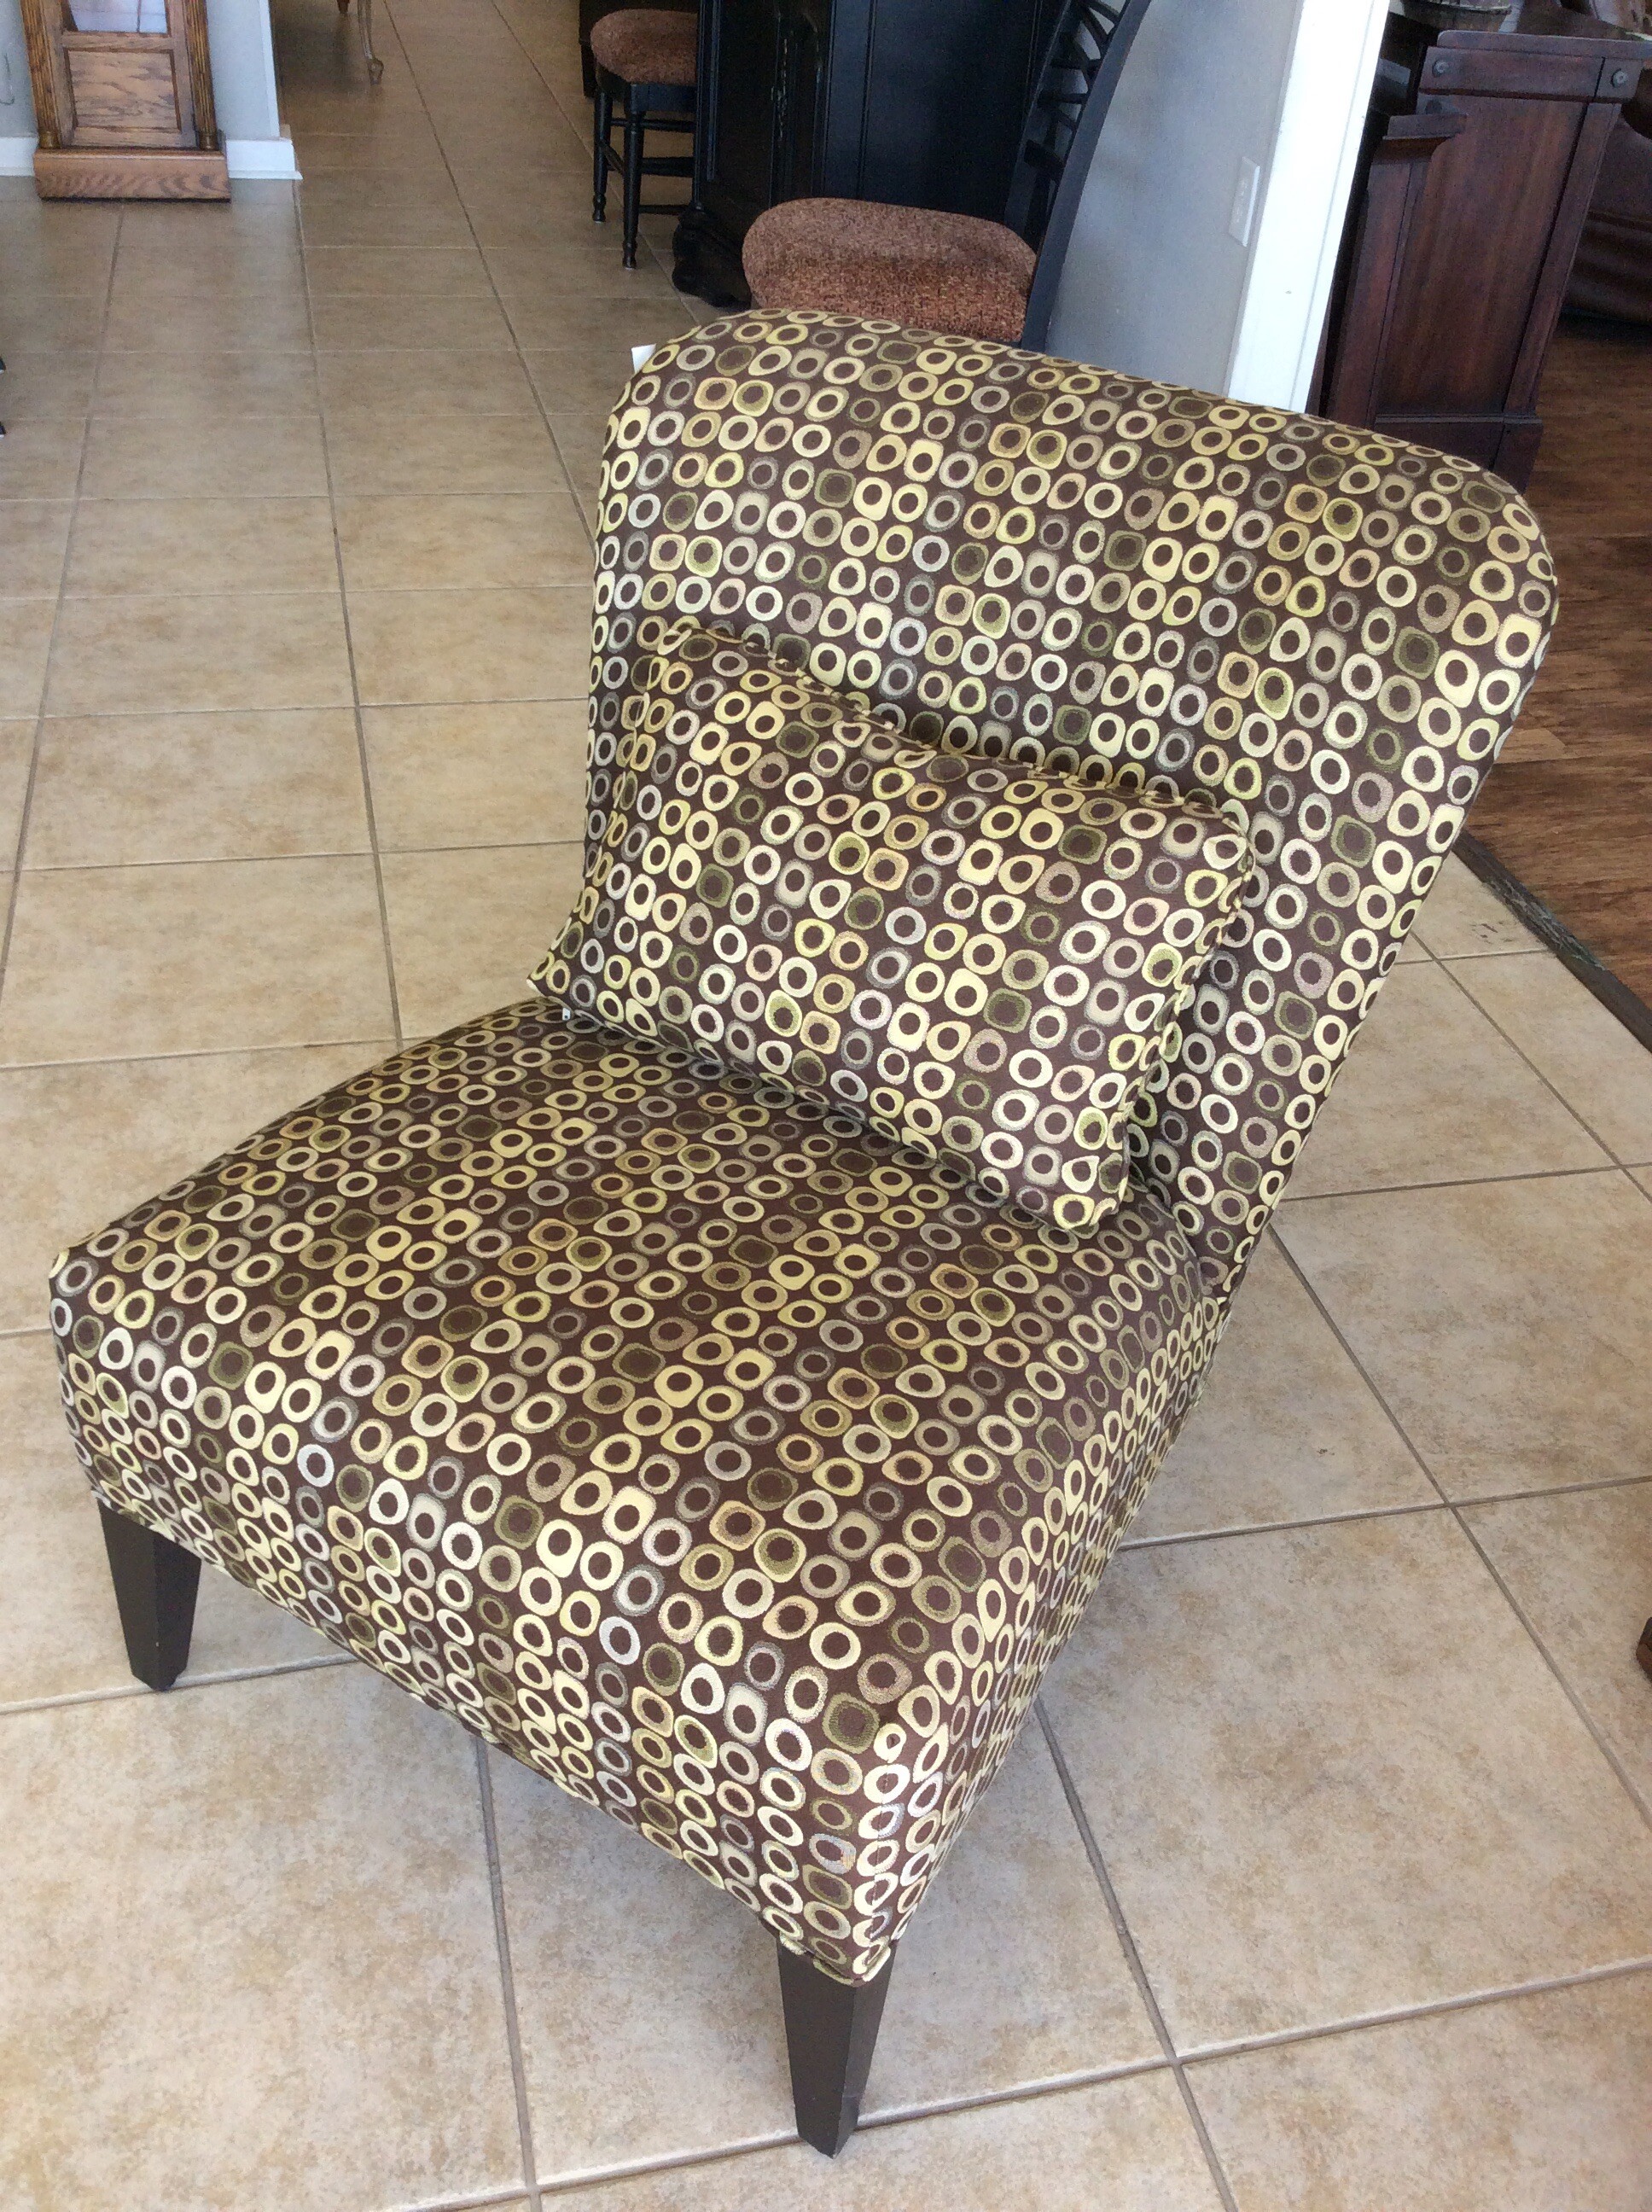 This pretty slipper chair has been upholstered in a modern geometric pattern of brown, gold and green. It comes with an accessory pillow.